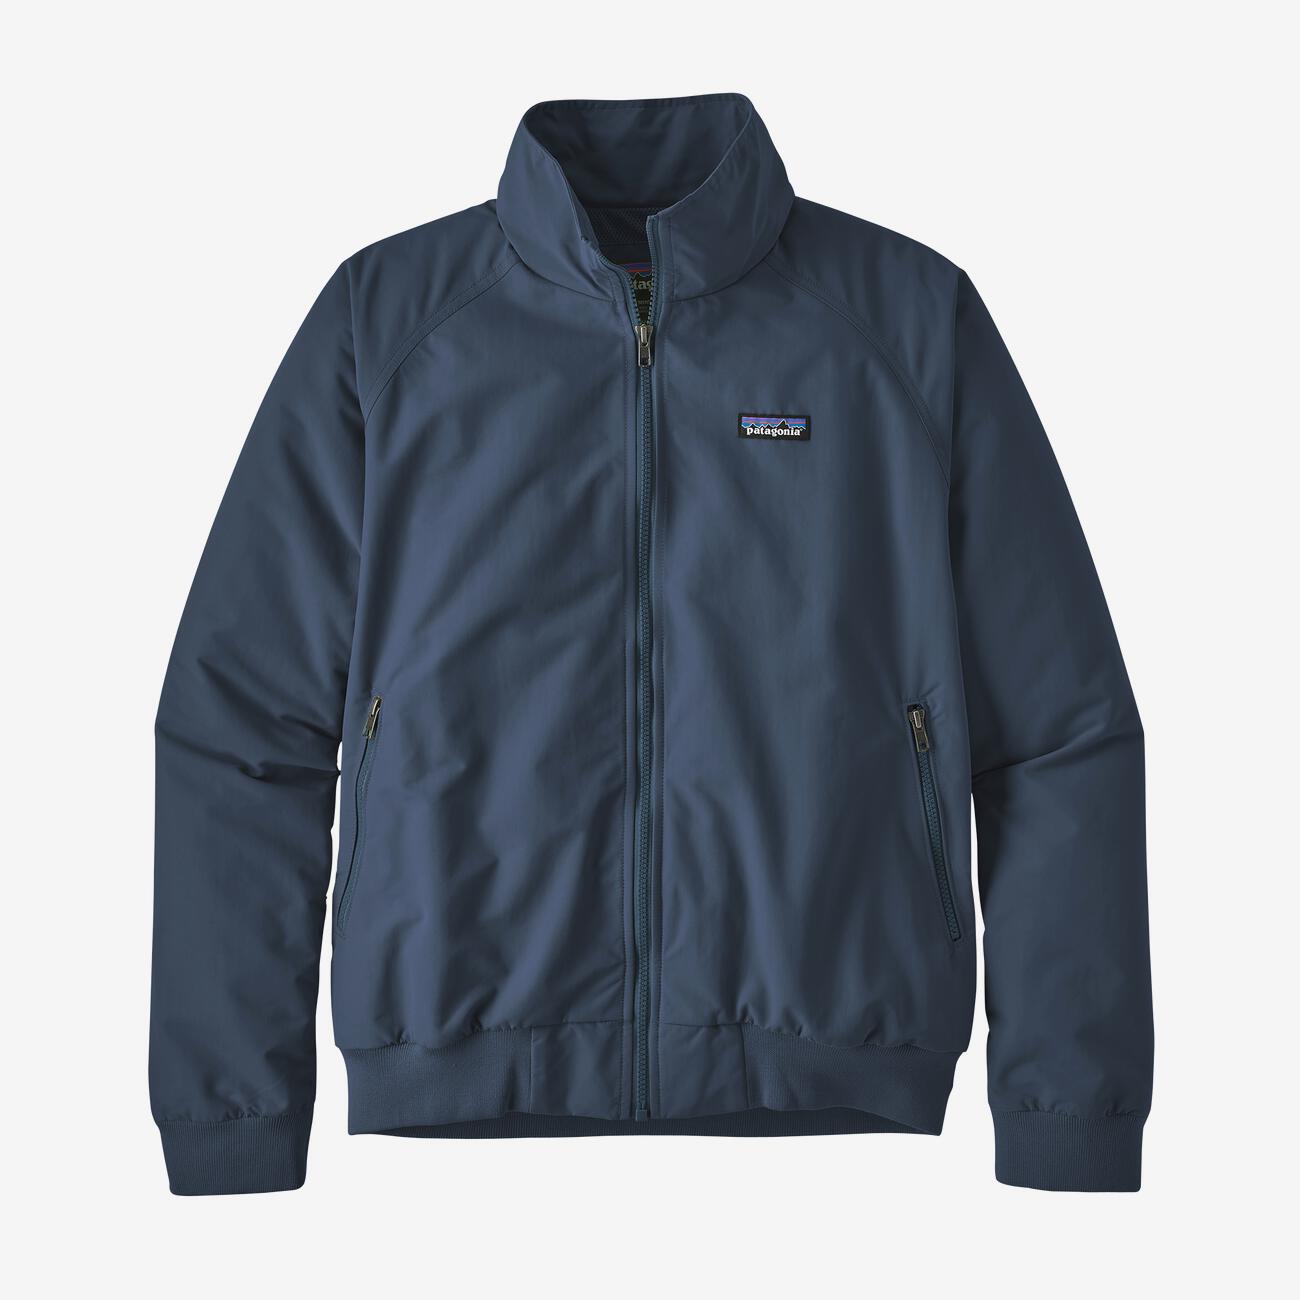 Read more about the article Patagonia – Men’s Baggies™ Jacket